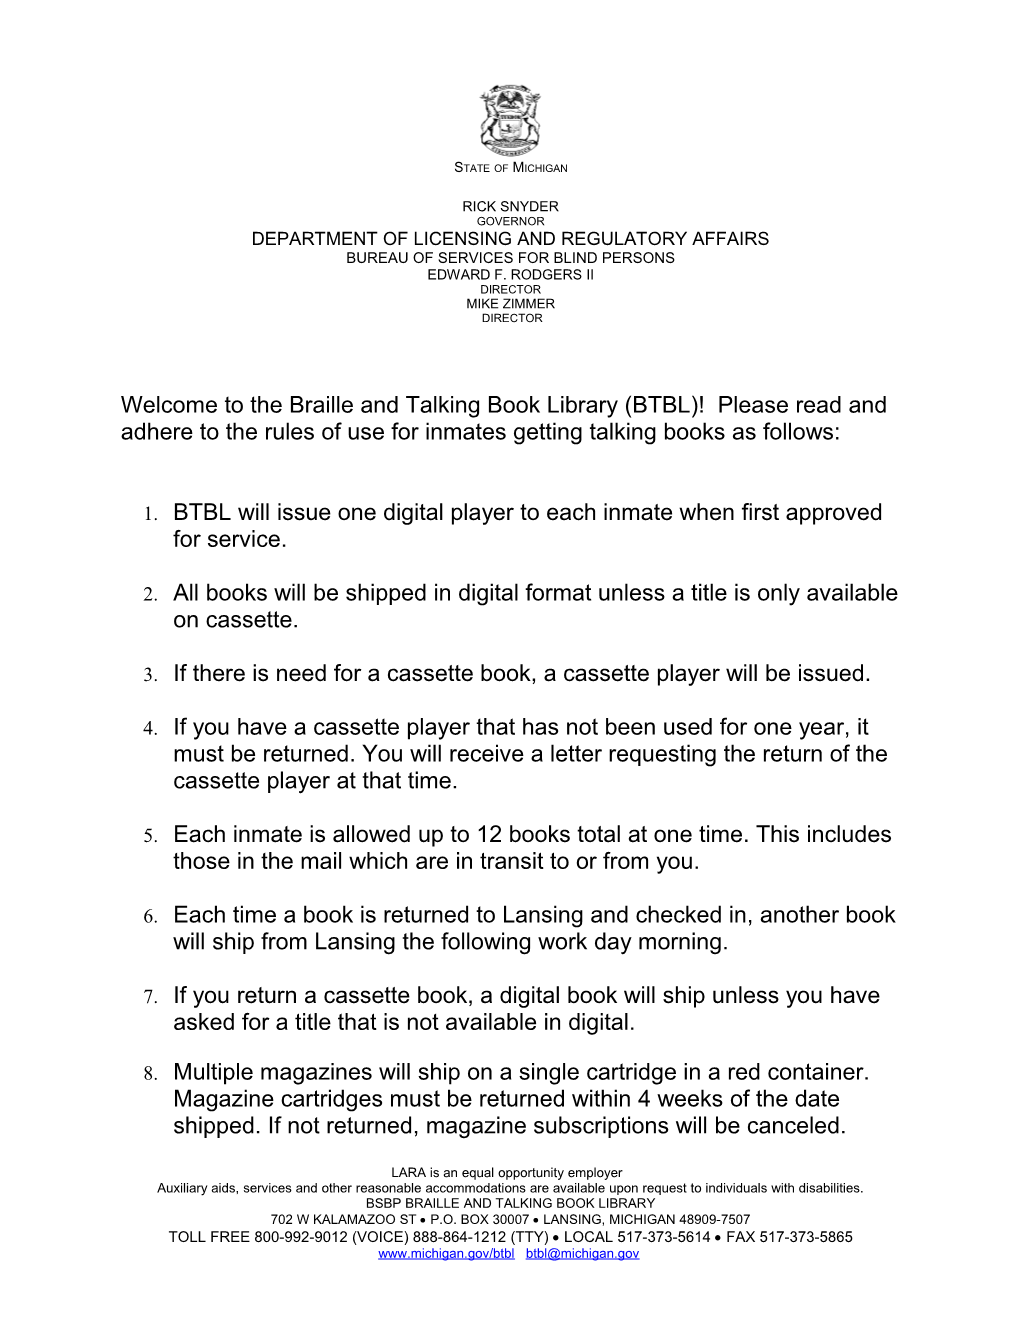 Welcome to the Braille and Talking Book Library (BTBL)! Please Read and Adhere to the Rules